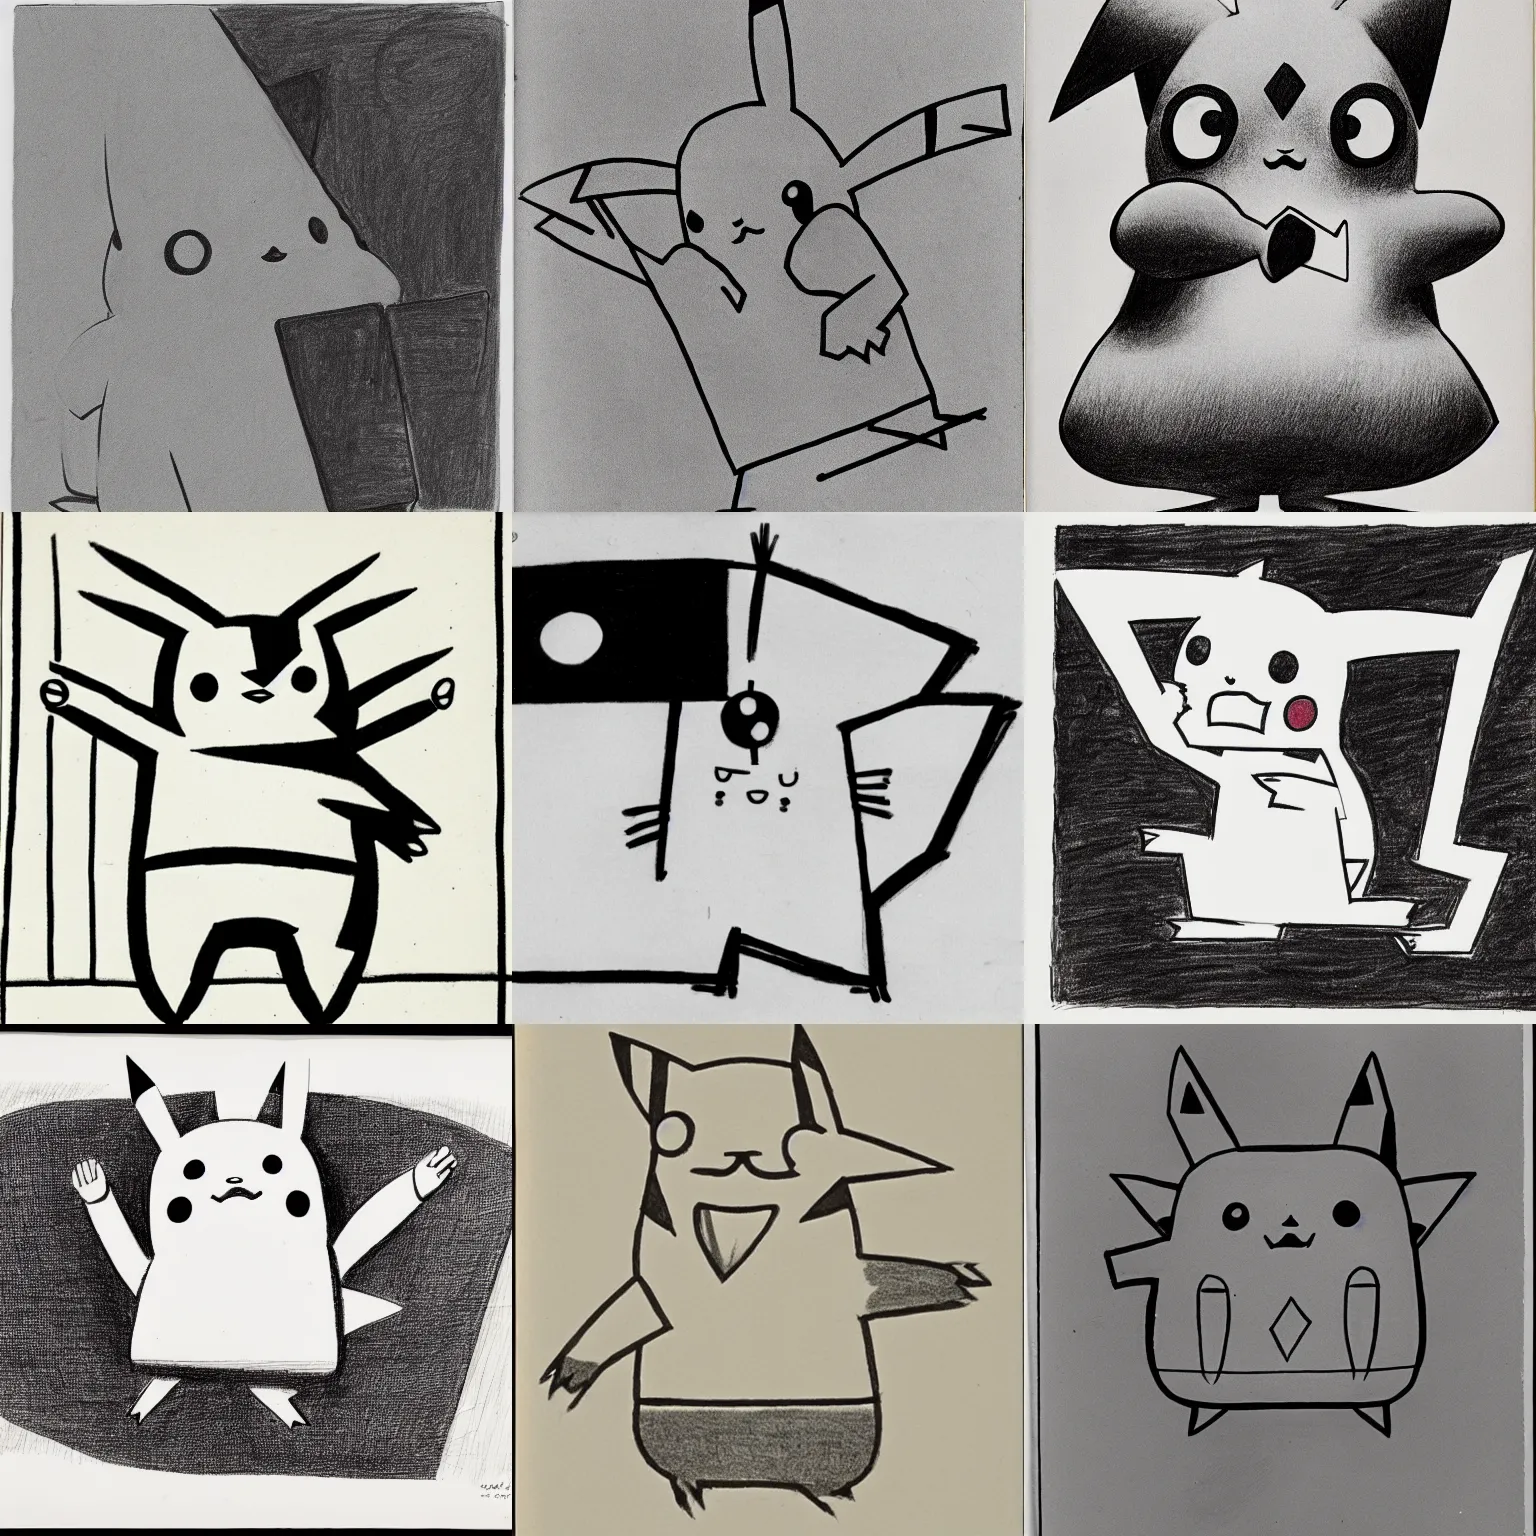 Prompt: saul steinberg drawing of pikachu, 1 9 6 4 moma catalog